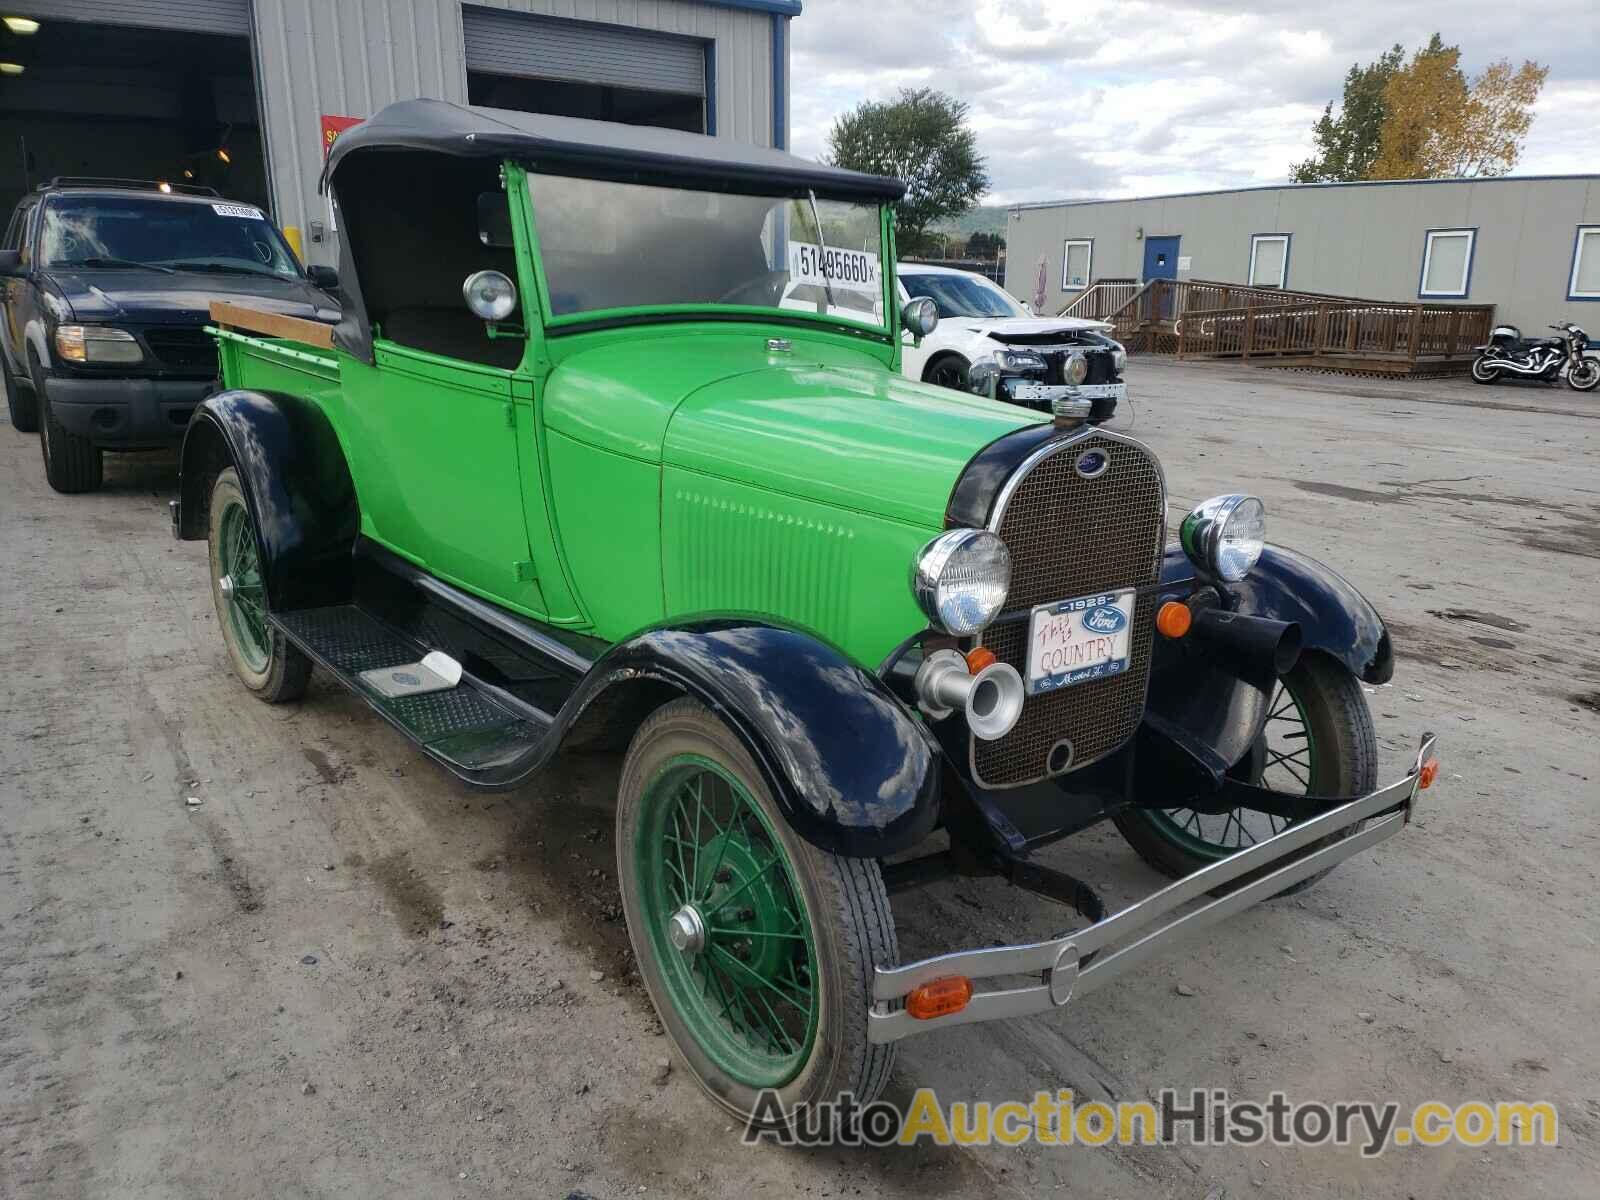 1928 FORD ROADSTER, A41022